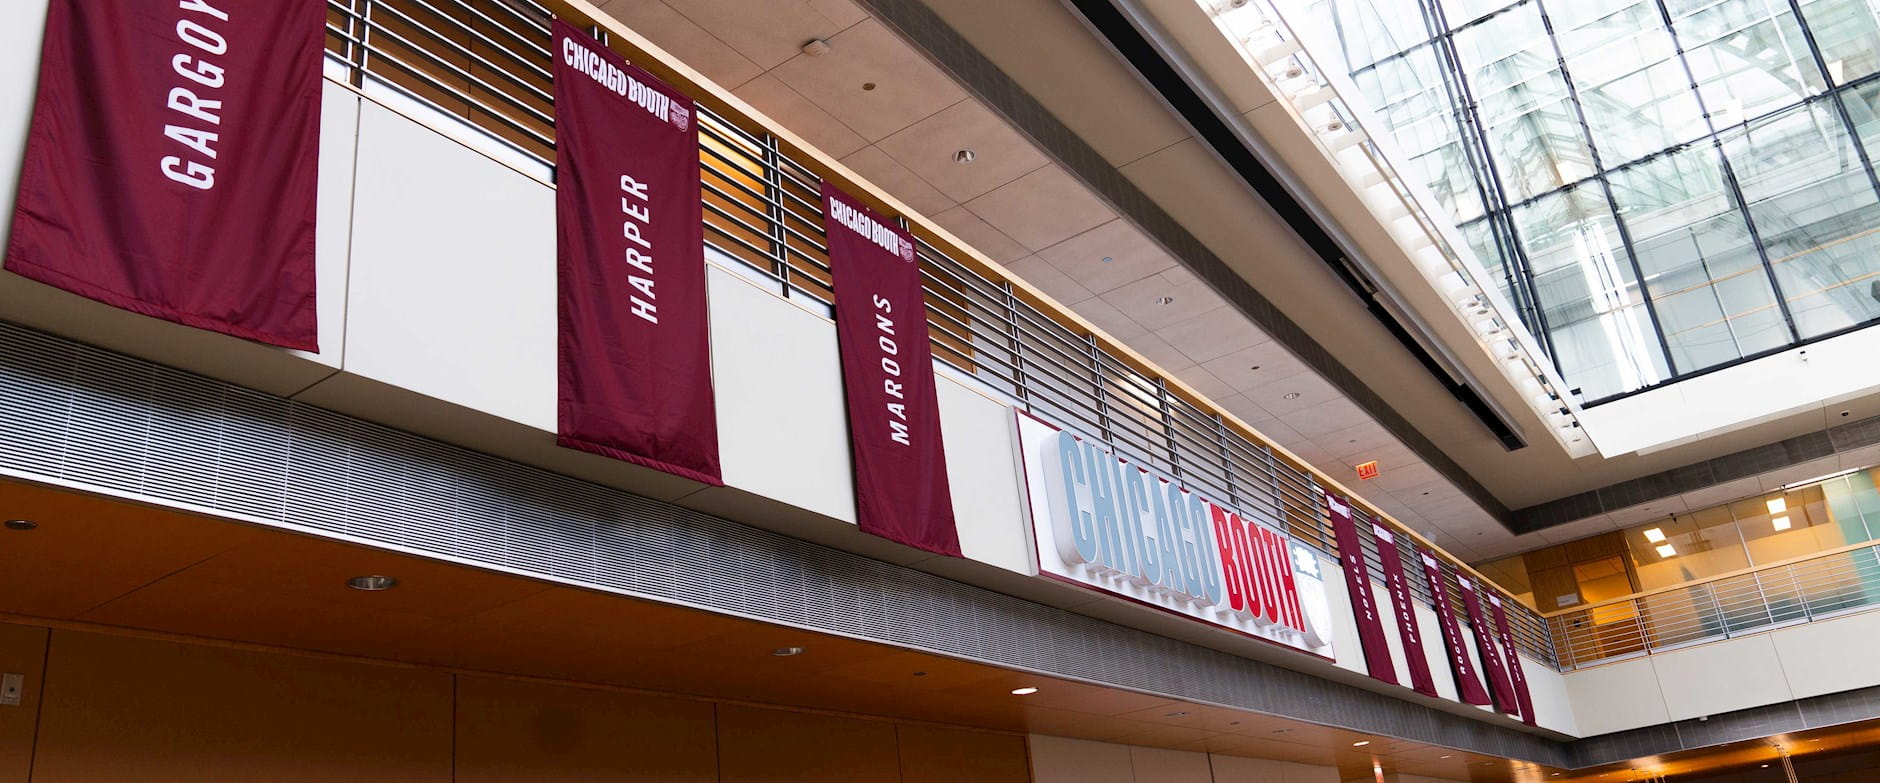 Banners and the "Chicago Booth" sign in the Winter Garden at the Harper Center. The banners read "Gargoyle", "Harper", and "Maroons".